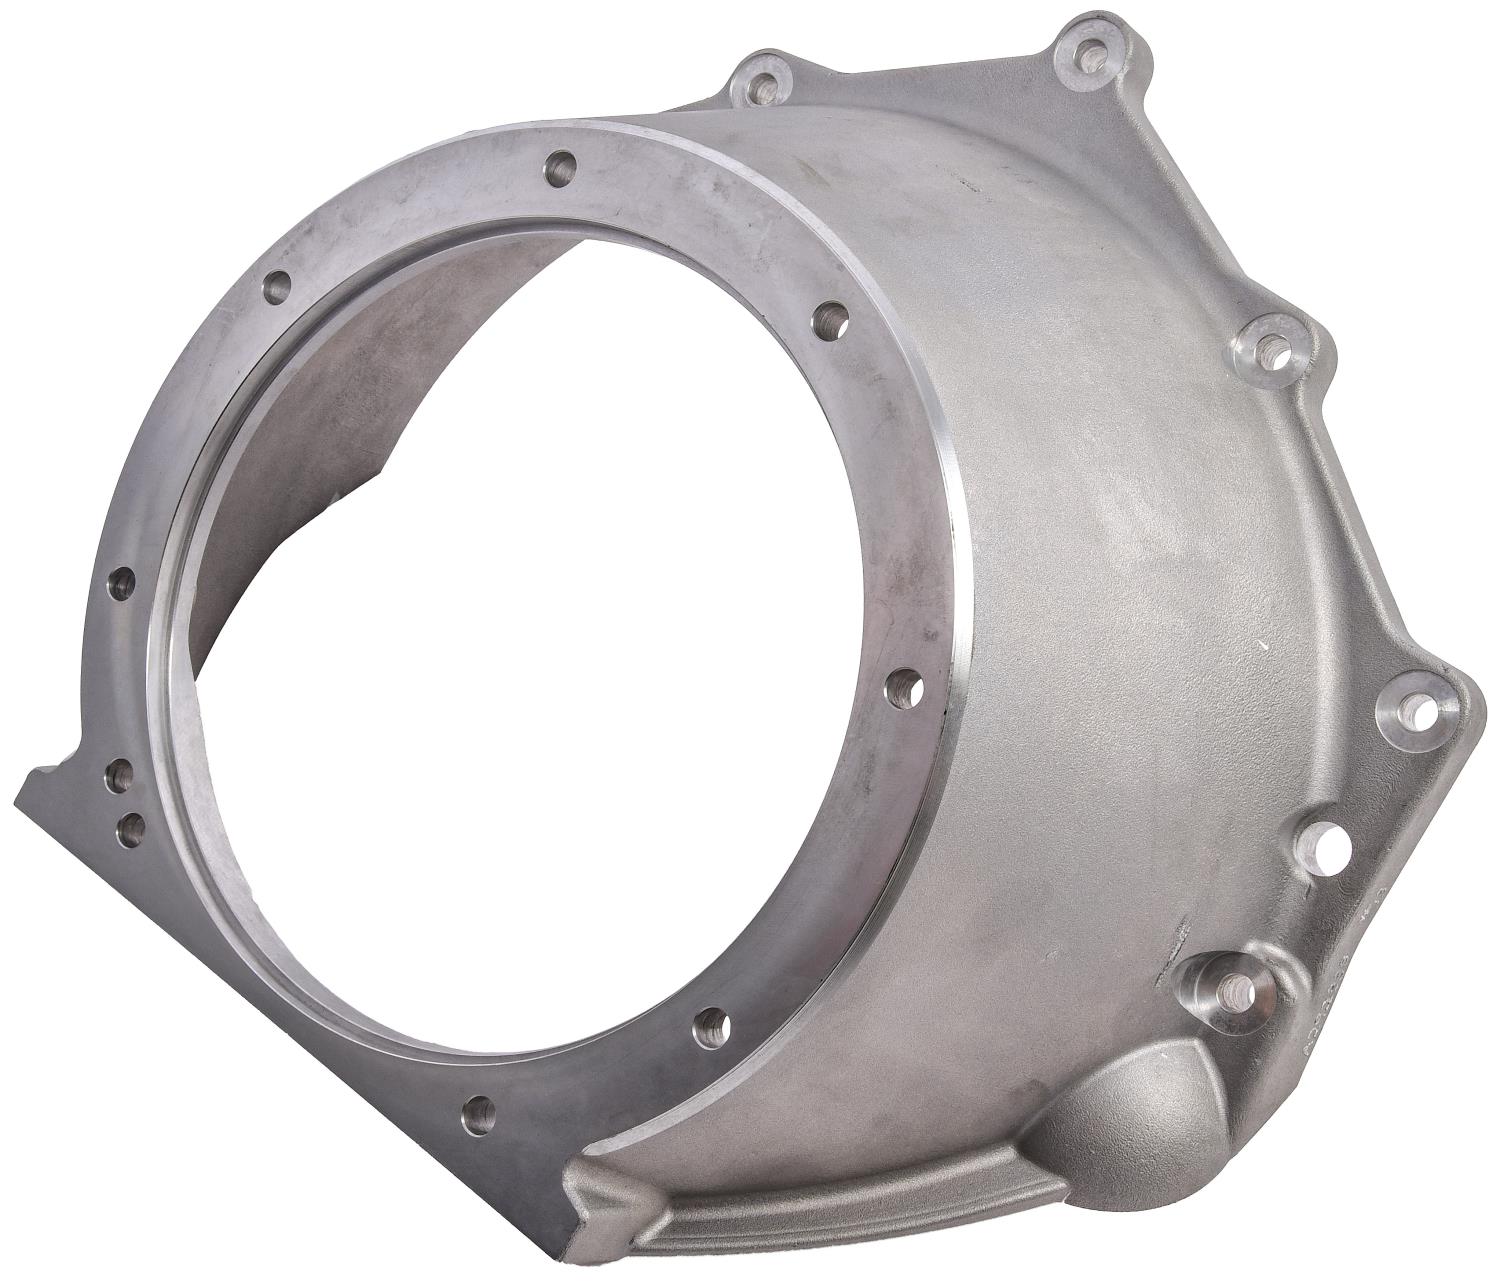 SFI 30.1 Certified Bellhousing for Aftermarket GM TH400